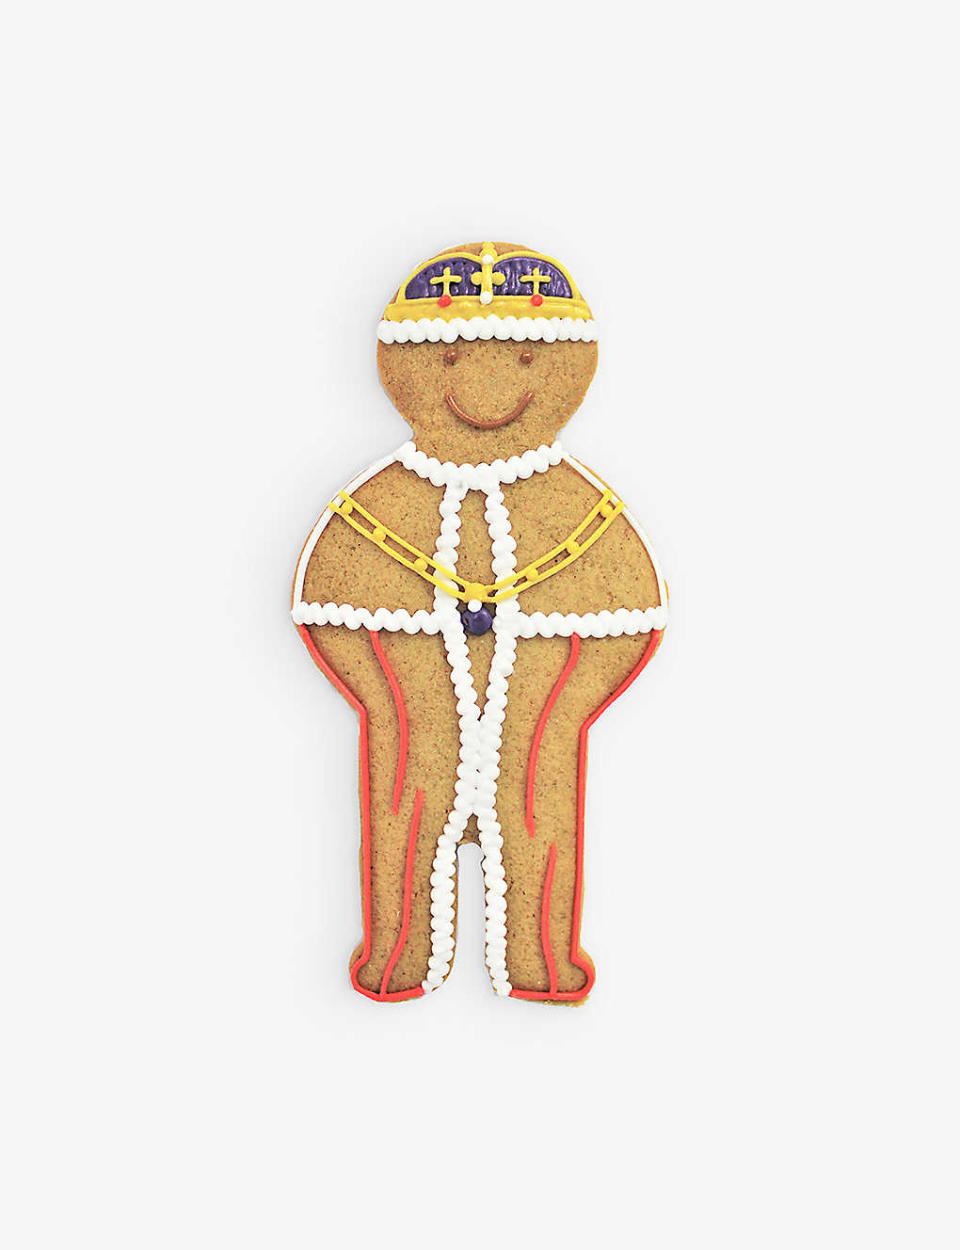 A Biscuiteers biscuit to mark the coronation, for sale at Selfridges online and in store.